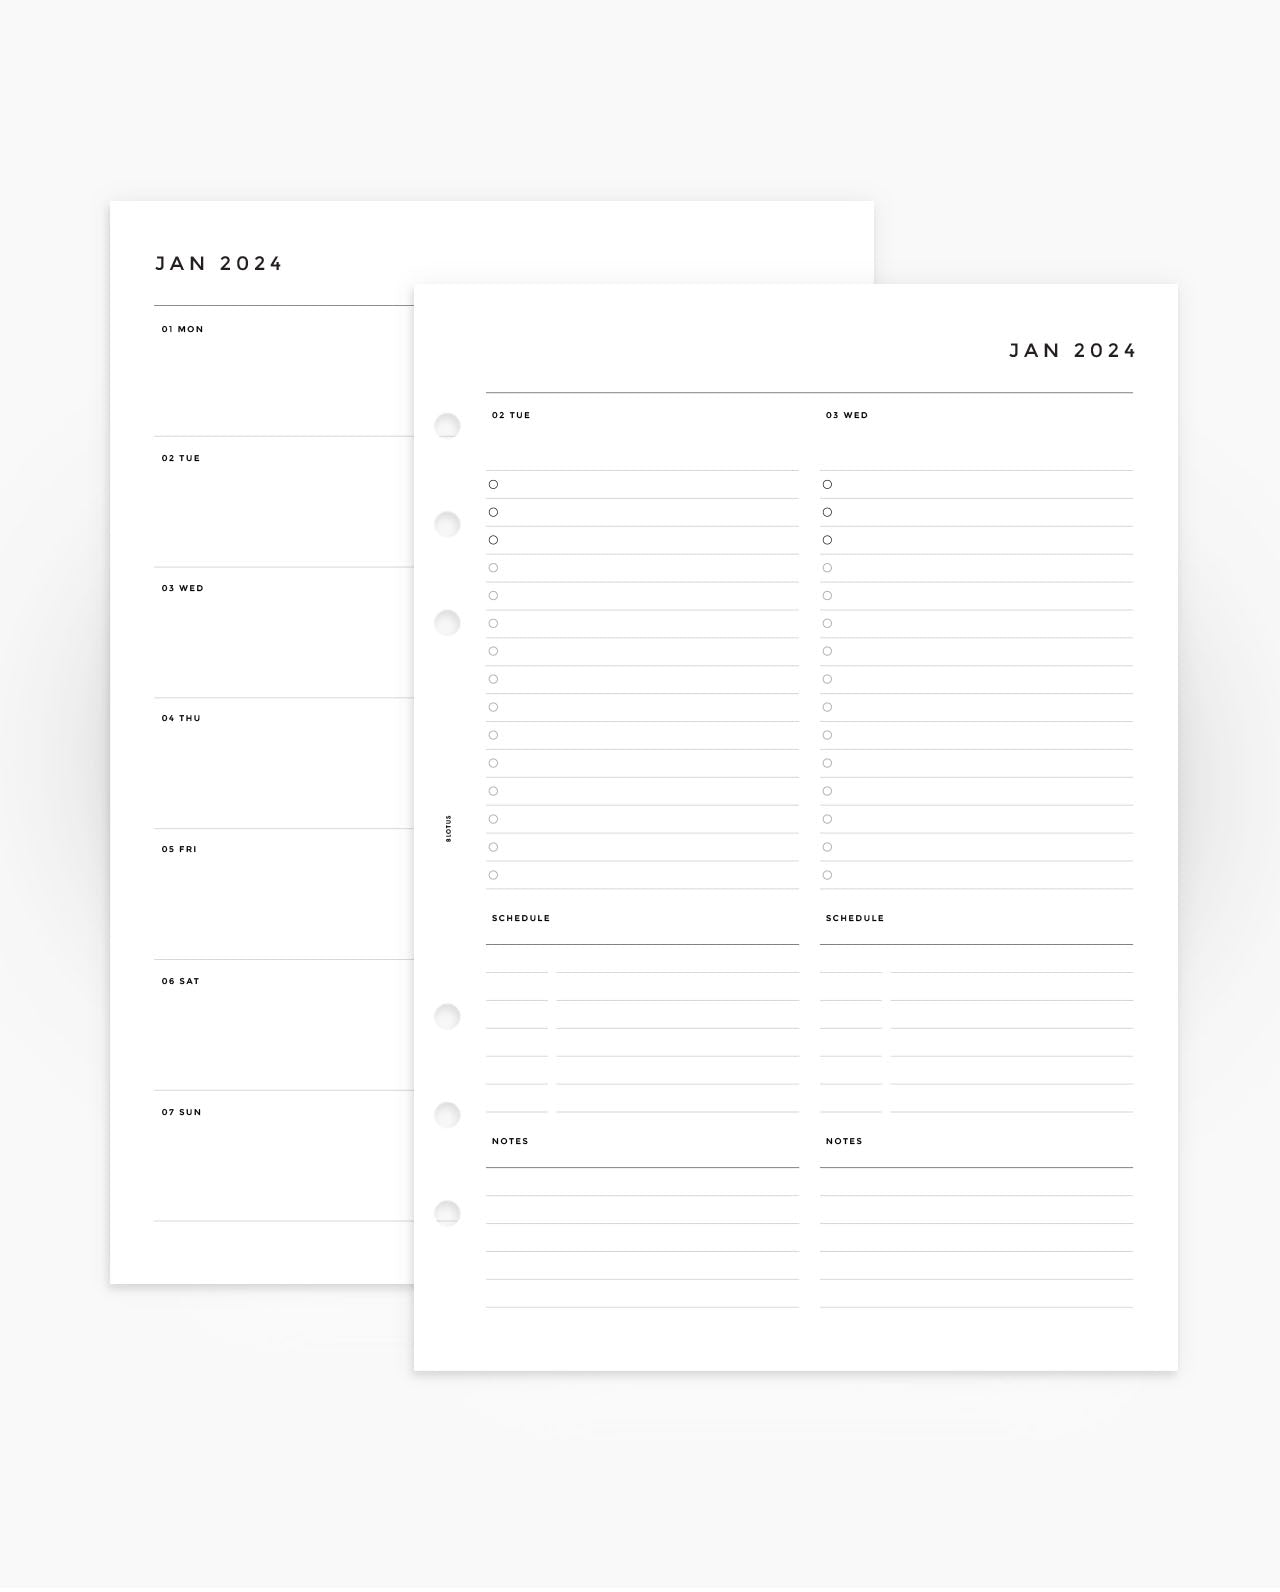 2024 Daily and Weekly Planners